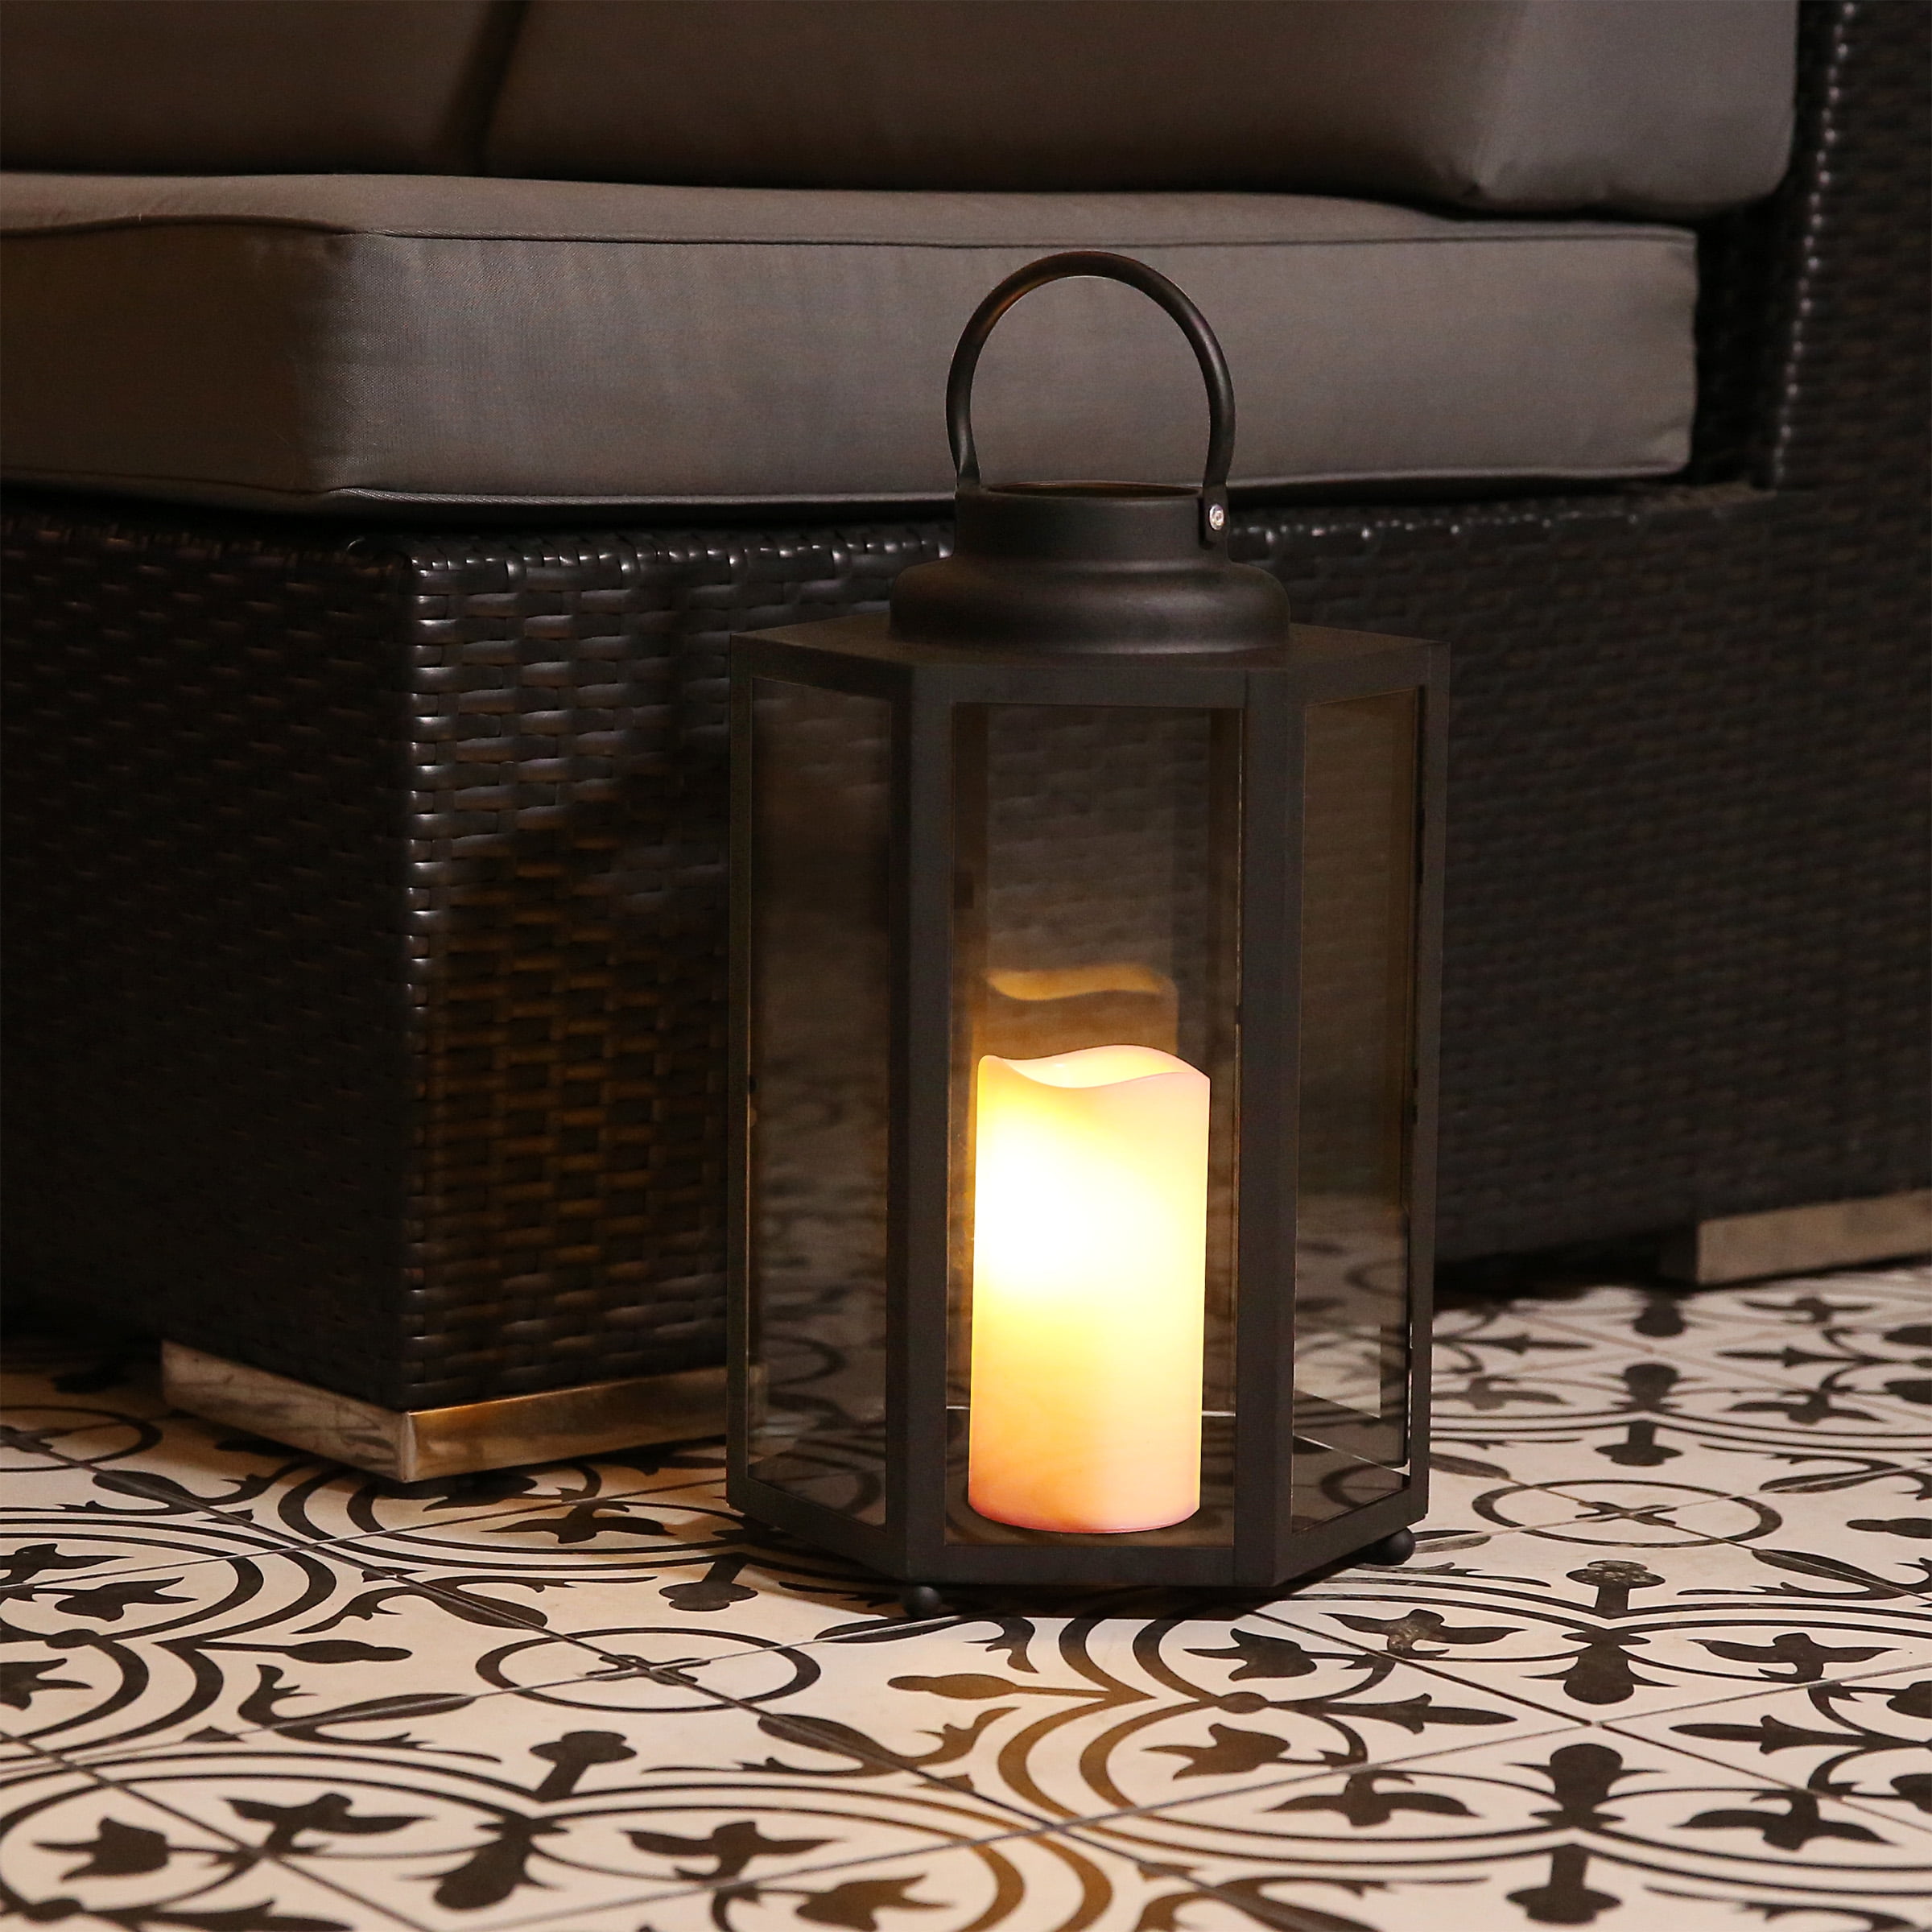 Picture of Alpine IVY104HH-S Black Hexagonal Candlelit Lantern with Warm White LEDs - Small